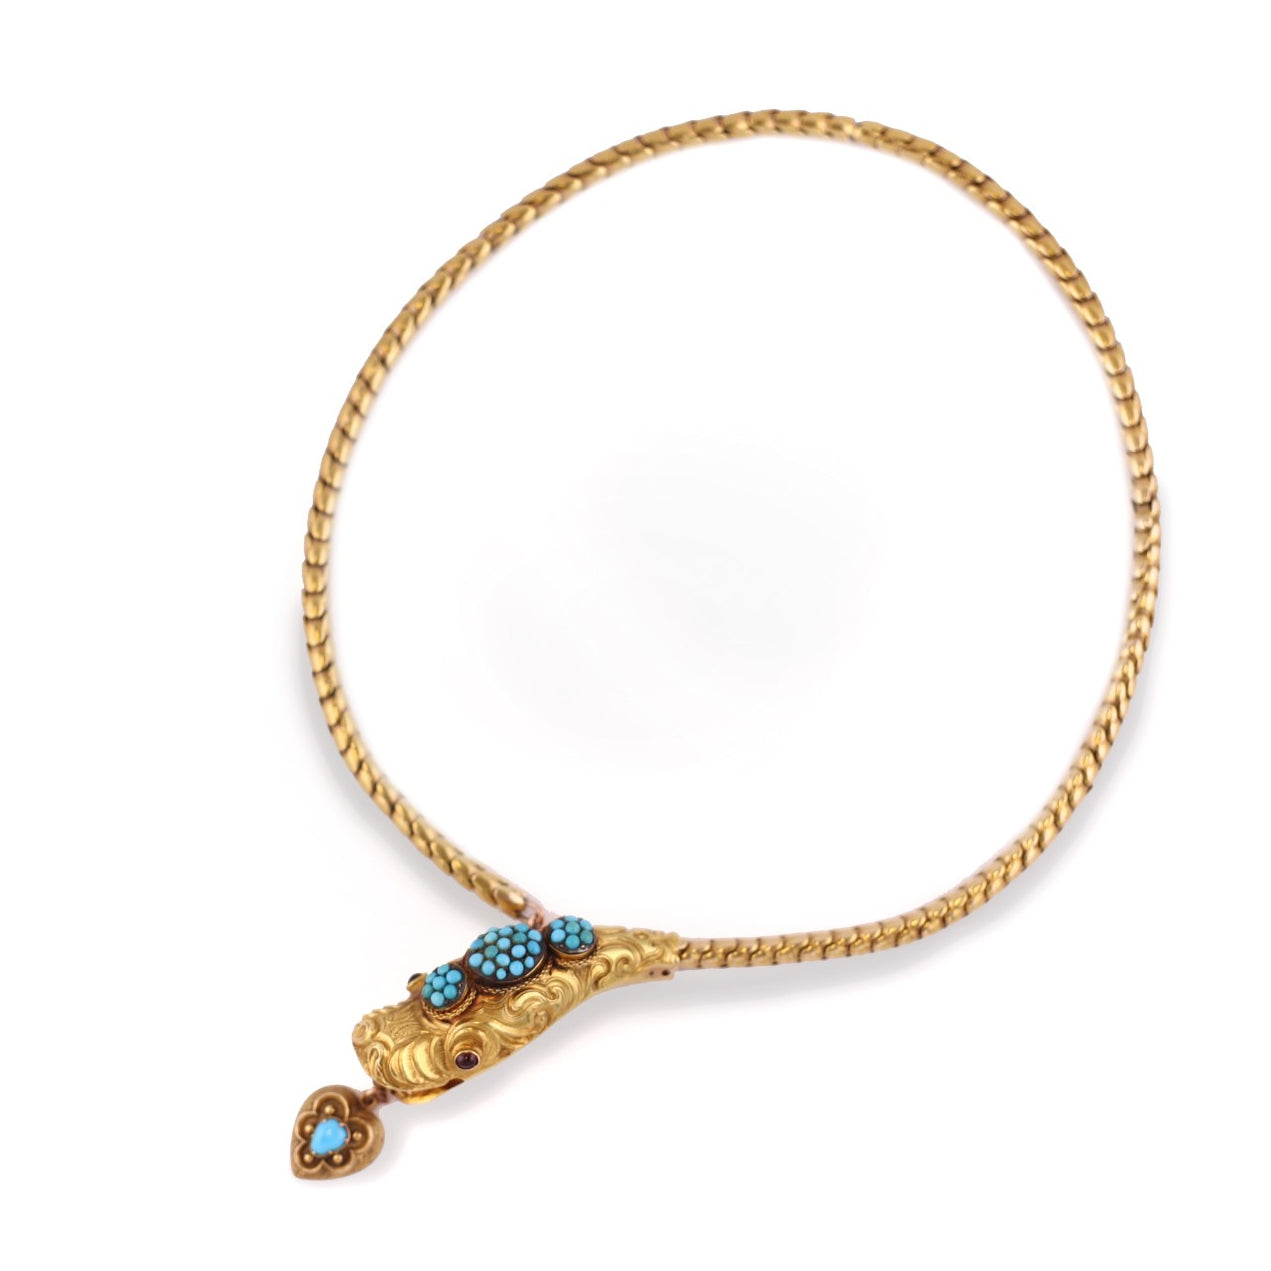 Victorian 18KT Yellow Gold Garnet & Turquoise Snake Necklace front